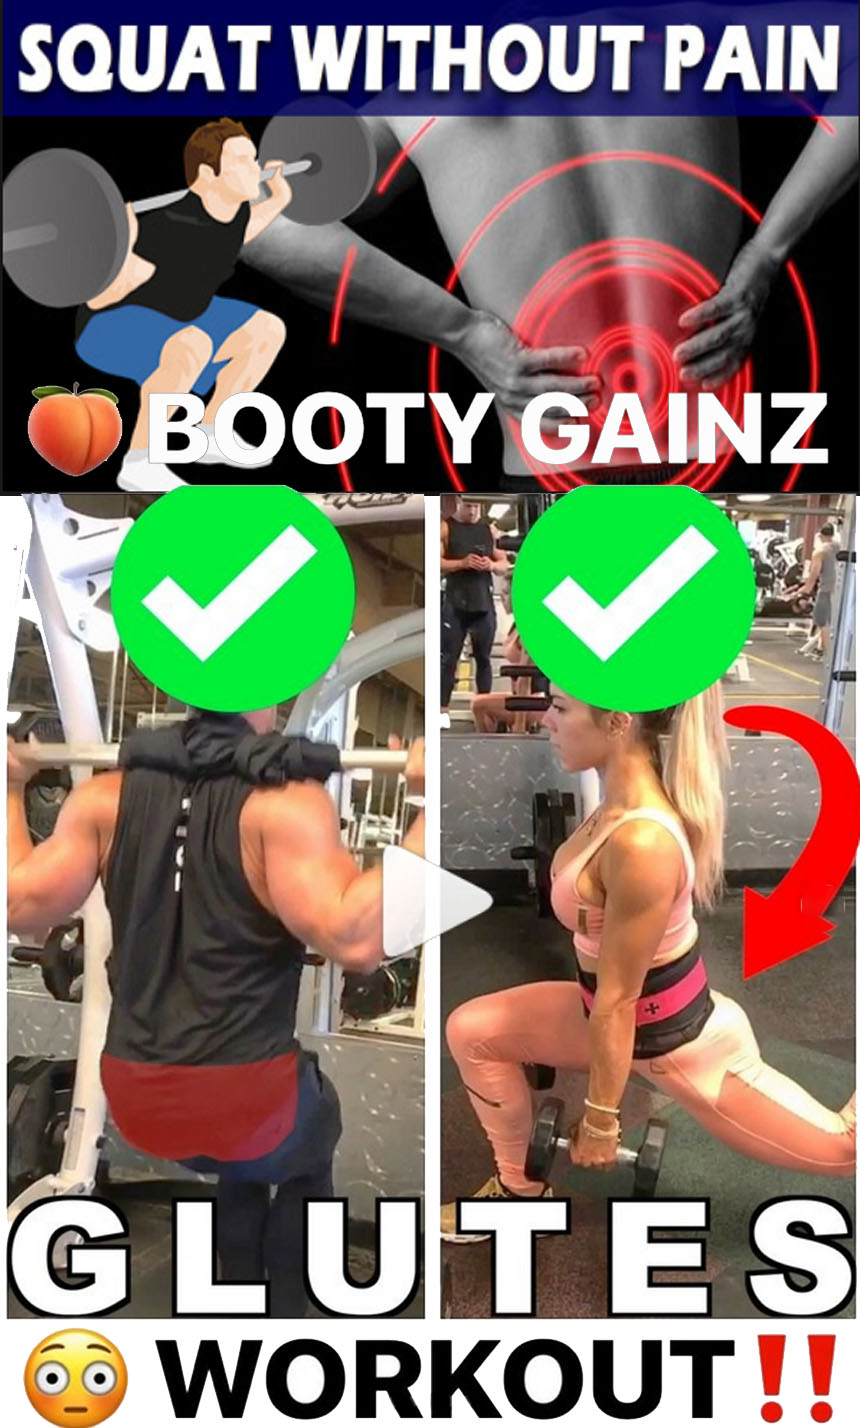 Glutes Workout & Squat Without Pain 